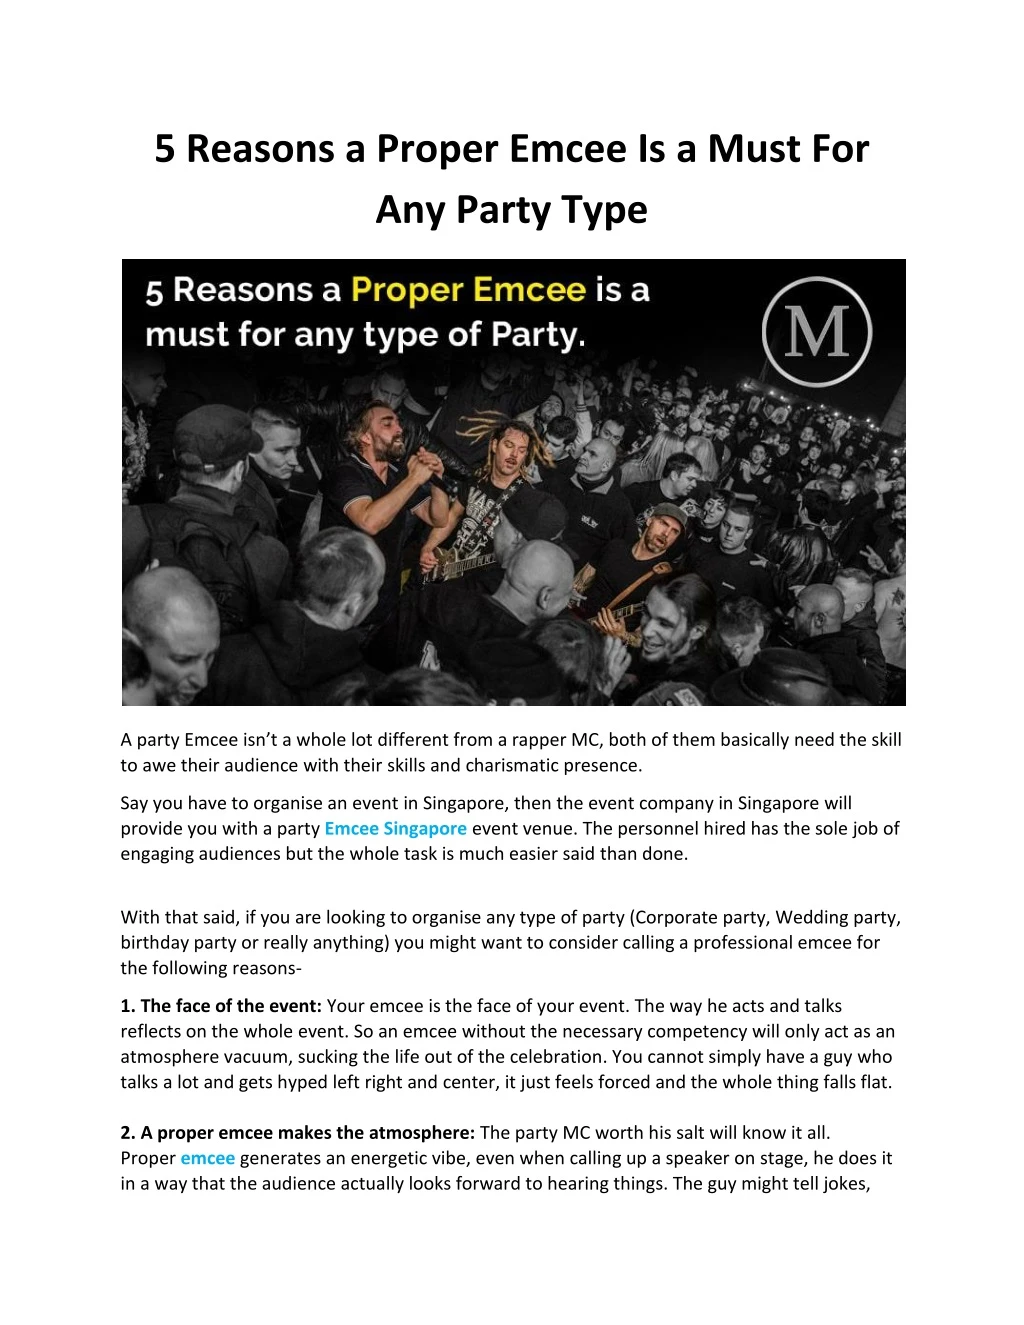 5 reasons a proper emcee is a must for any party